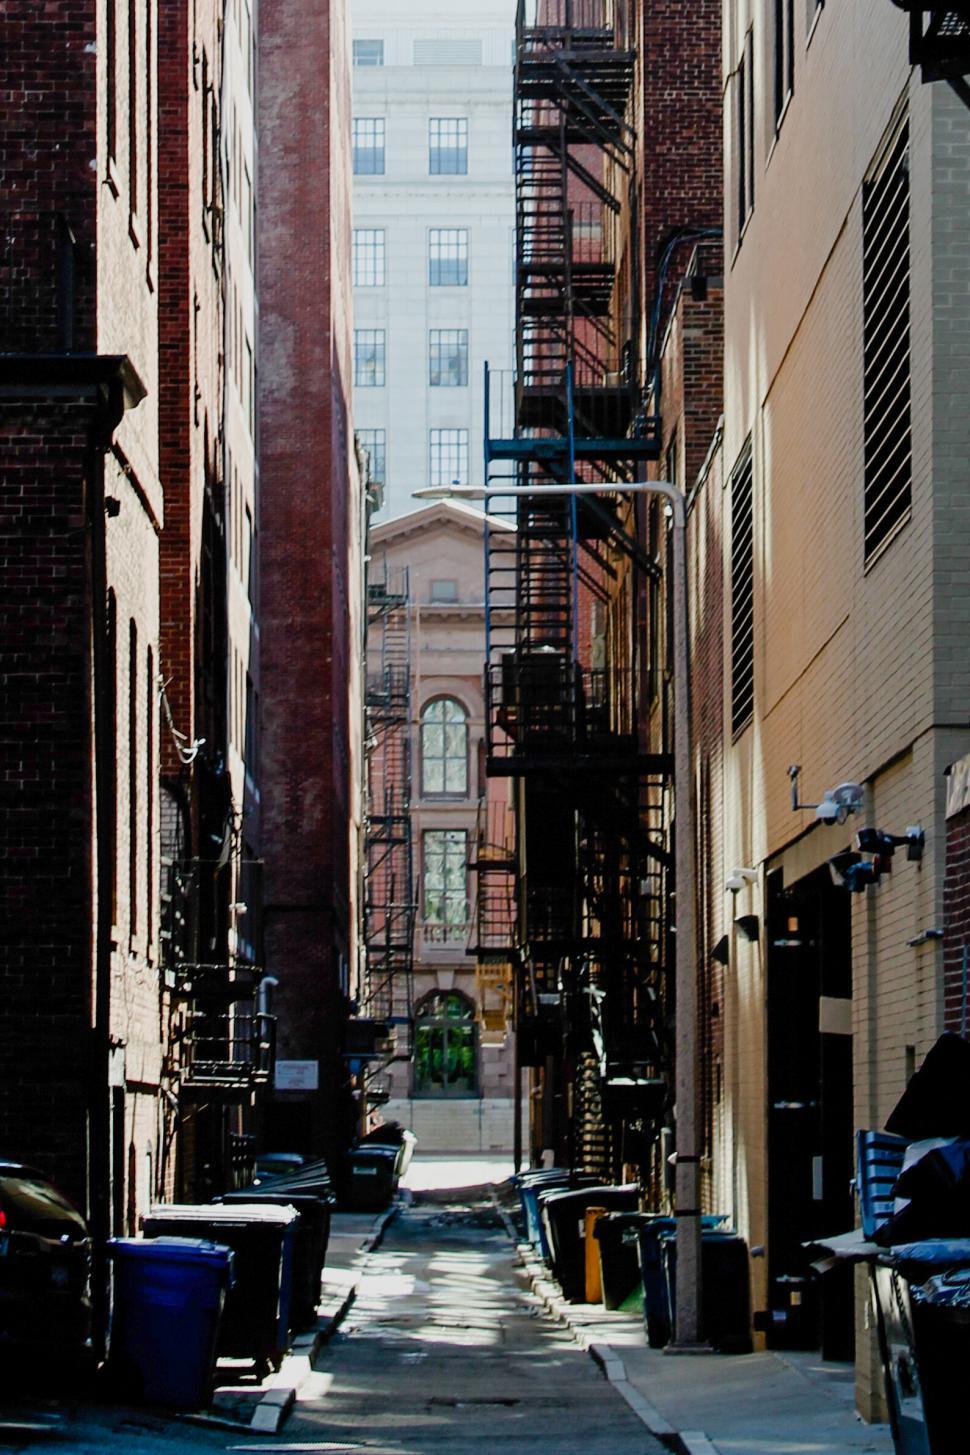 Free Image of Narrow urban alley with fire escape stairs in sunlight 